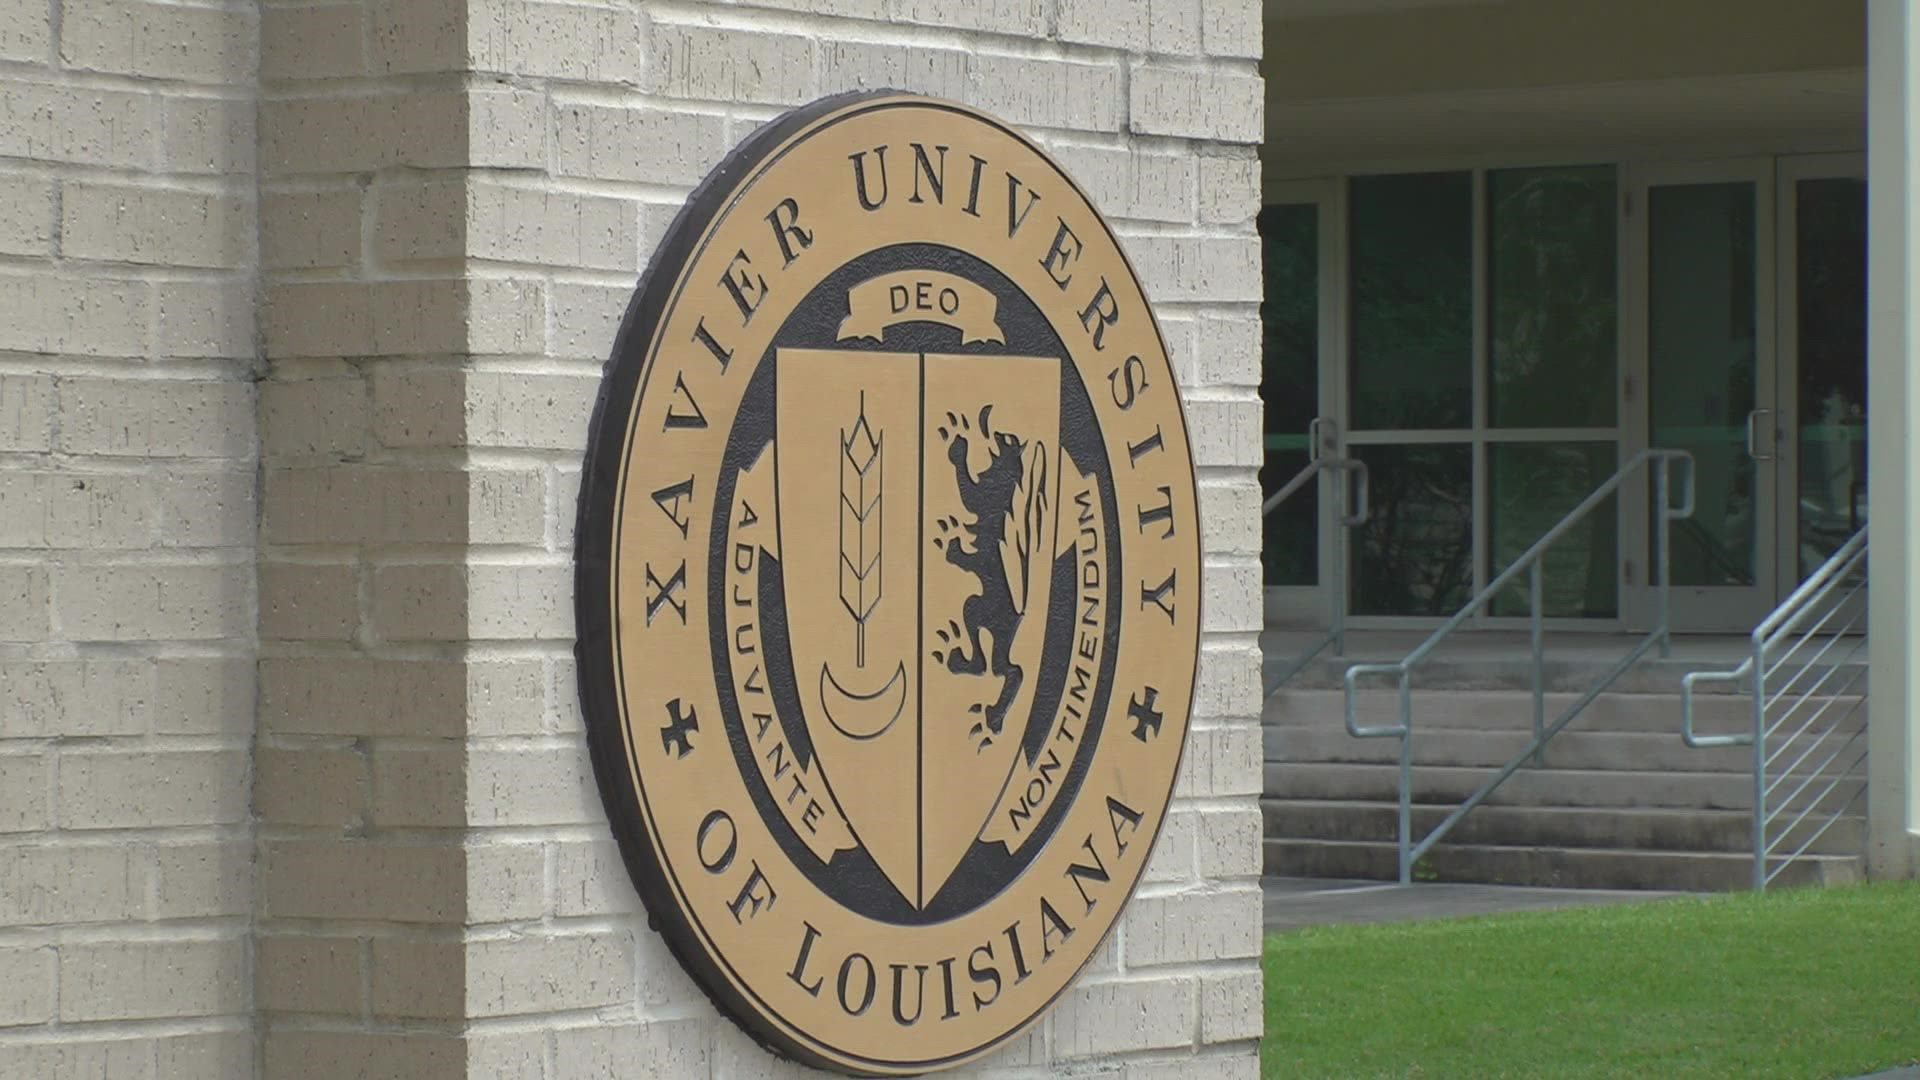 Xavier University has started dropping students that have not been vaccinated this semester. One student said he does not agree with it but has gotten the shot.